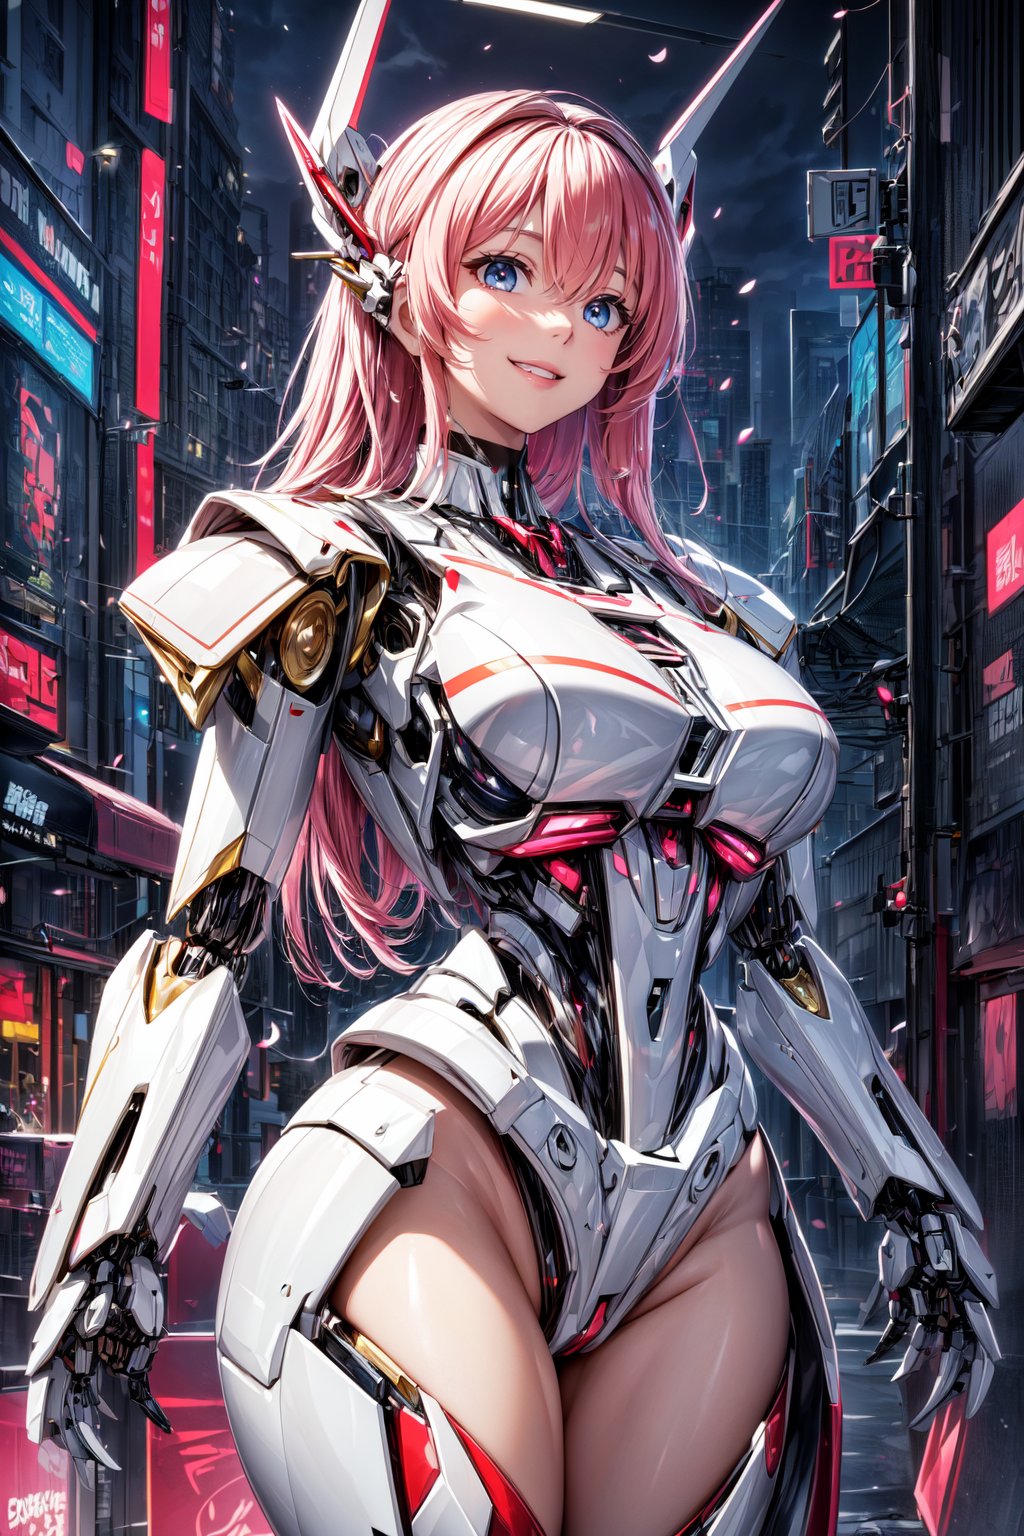 Masterpiece, High quality, 64K, Unity 64K Wallpaper, HDR, Best Quality, RAW, Super Fine Photography, Super High Resolution, Super Detailed, 
Beautiful and Aesthetic, Stunningly beautiful, Perfect proportions, 
1girl, Solo, White skin, Detailed skin, Realistic skin details, (Mecha:1.5)
Futuristic Mecha, Arms Mecha, Dynamic pose, Battle stance, Swaying hair, by FuturEvoLab, 
Dark City Night, Cyberpunk City, Cyberpunk architecture, Future architecture, Fine architecture, Accurate architectural structure, Detailed complex busy background, Gorgeous, Cherry blossoms,
Sharp focus, Perfect facial features, Pure and pretty, Perfect eyes, Lively eyes, Elegant face, Delicate face, Exquisite face, Pink Mecha, 